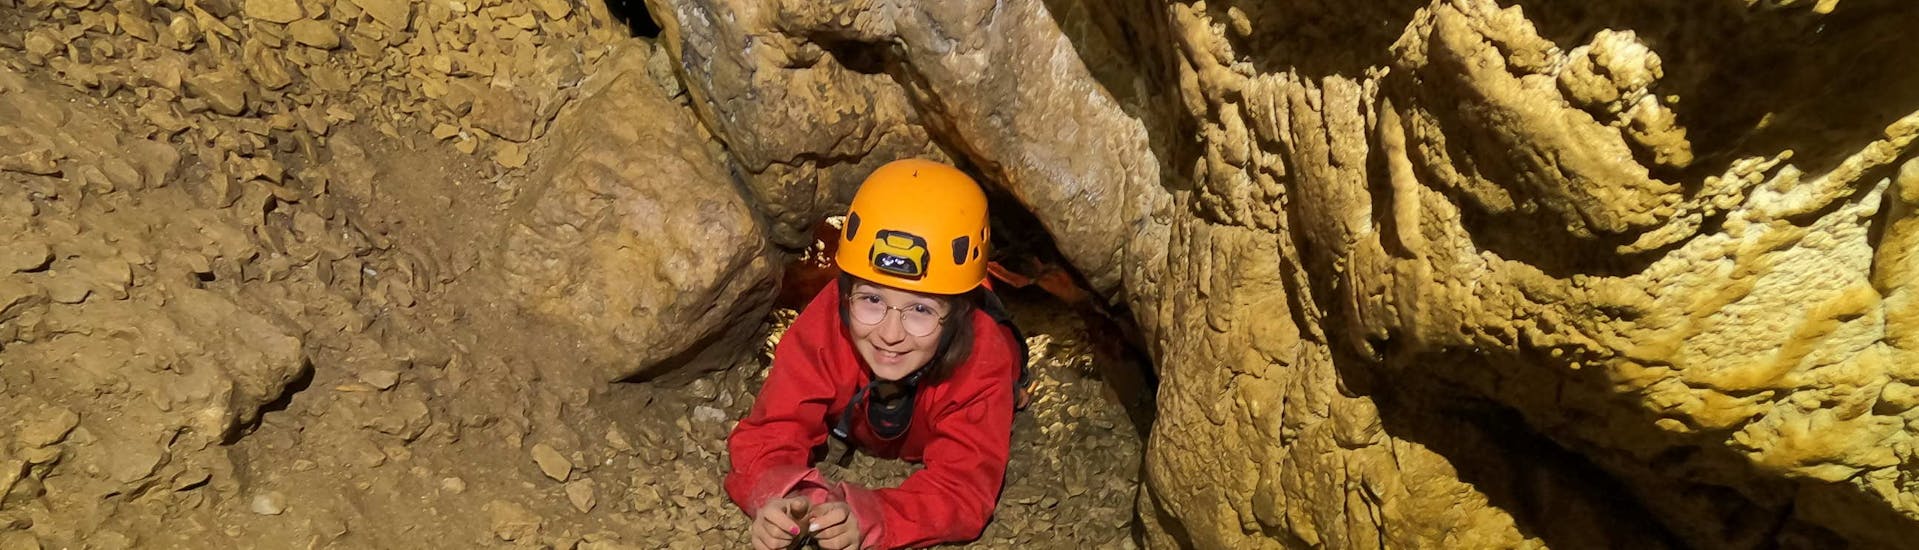 Caving in Spectaclan for Families.